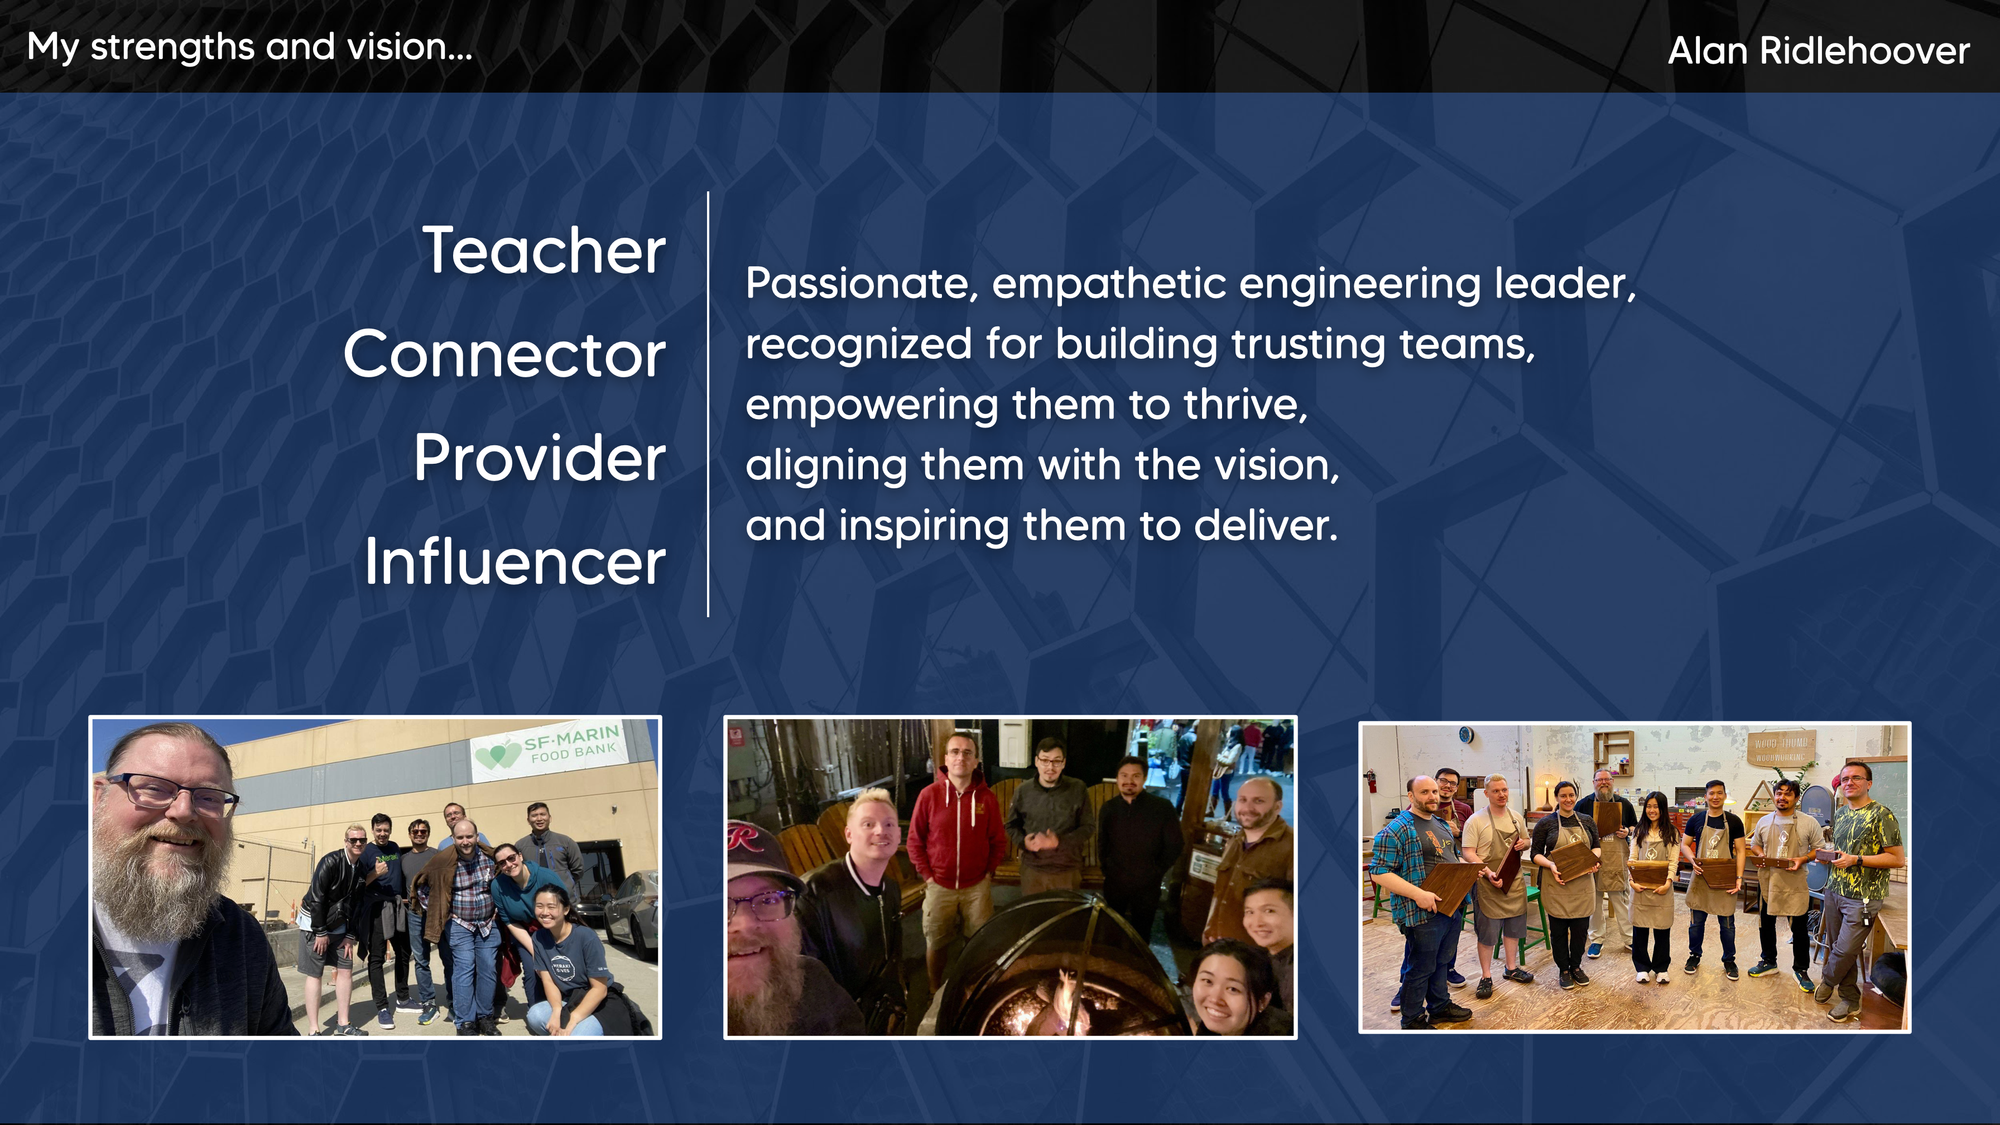 Alan Ridlehoover's Leadership Deck - Strengths and Vision slide with photos of my teams